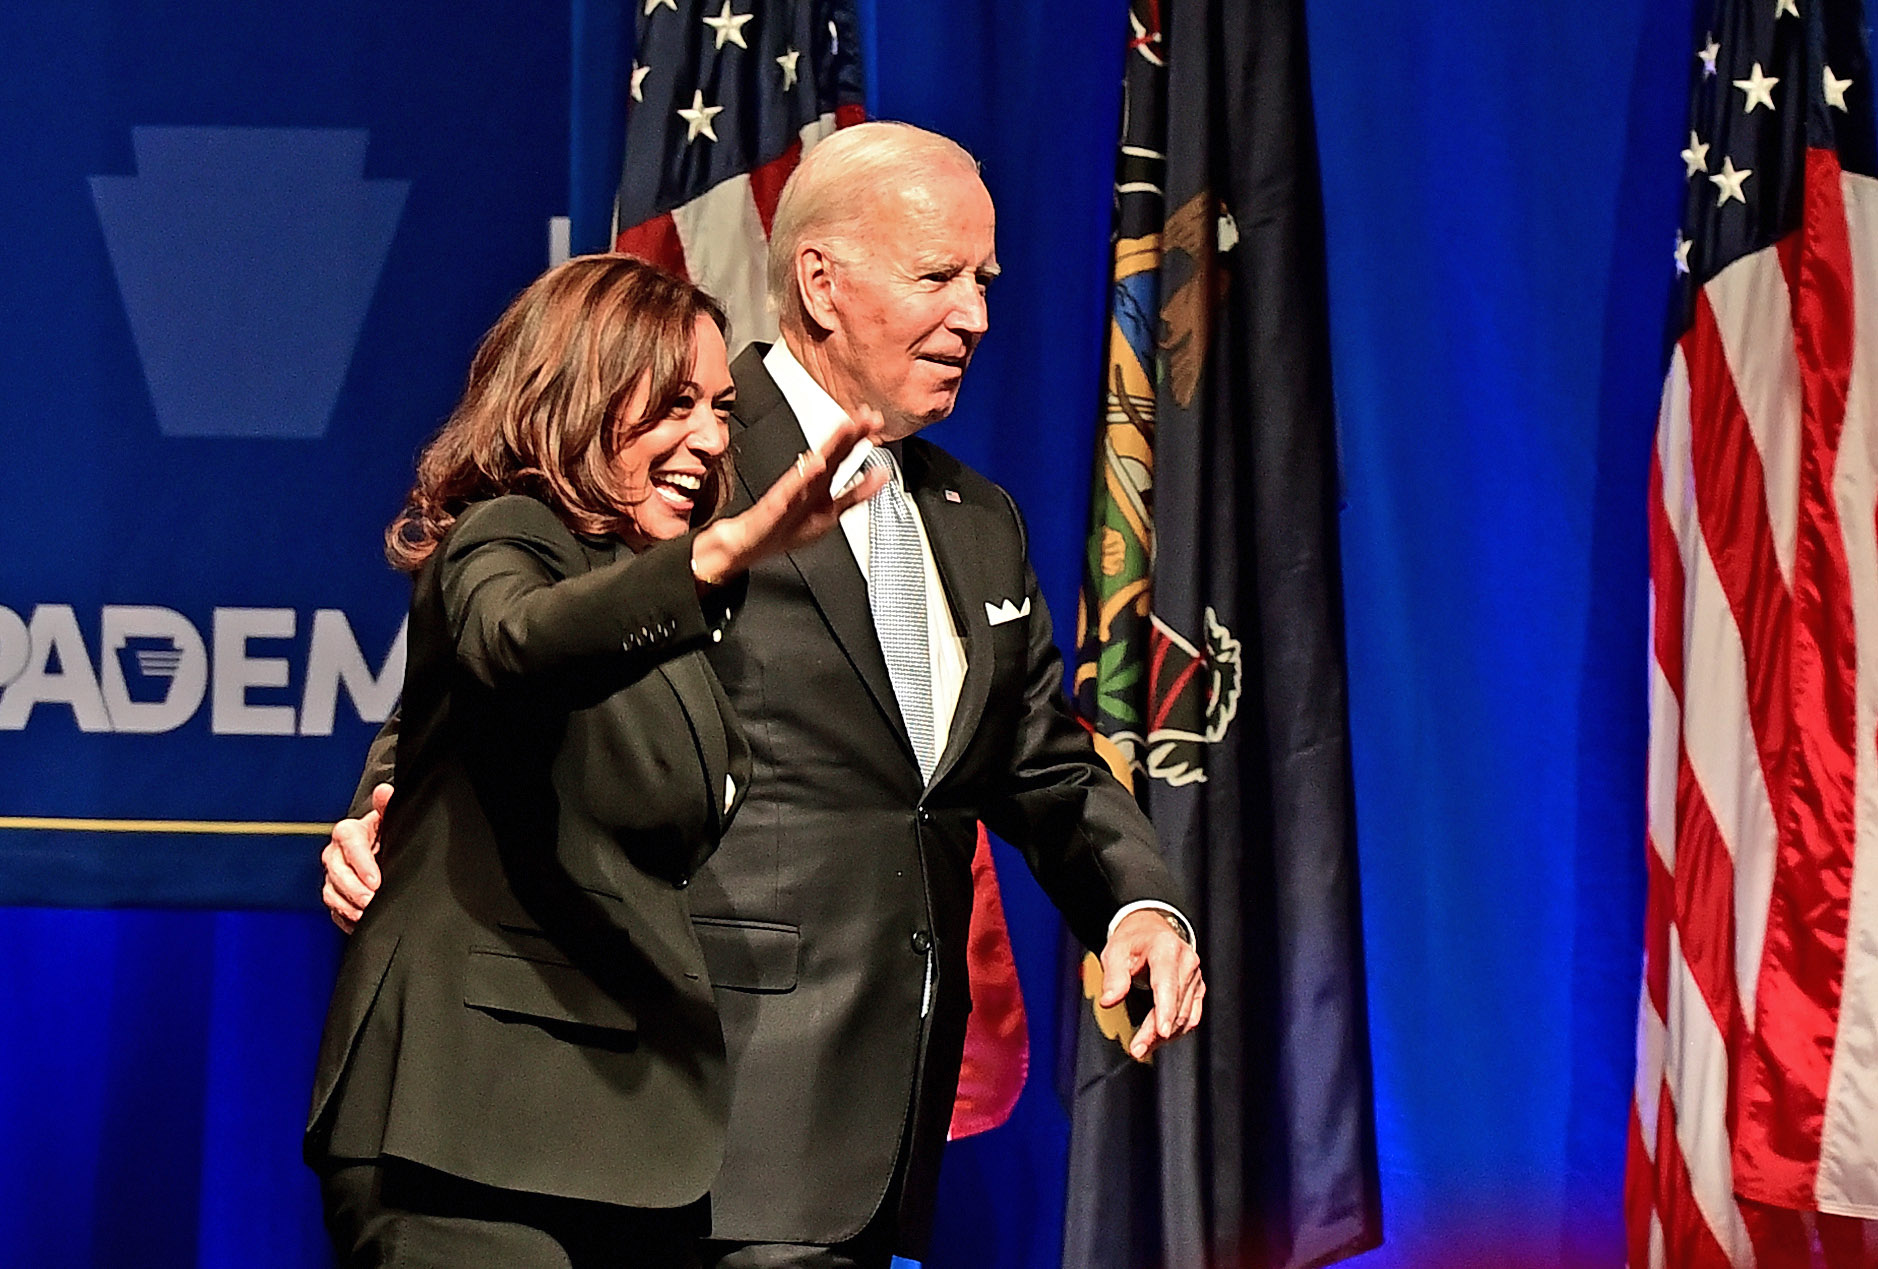 PHOTO: President Joe Biden and Vice President Kamala Harris wave to supporters during the Democratic Party's Independence Dinner on Oct. 28, 2022 in Philadelphia.